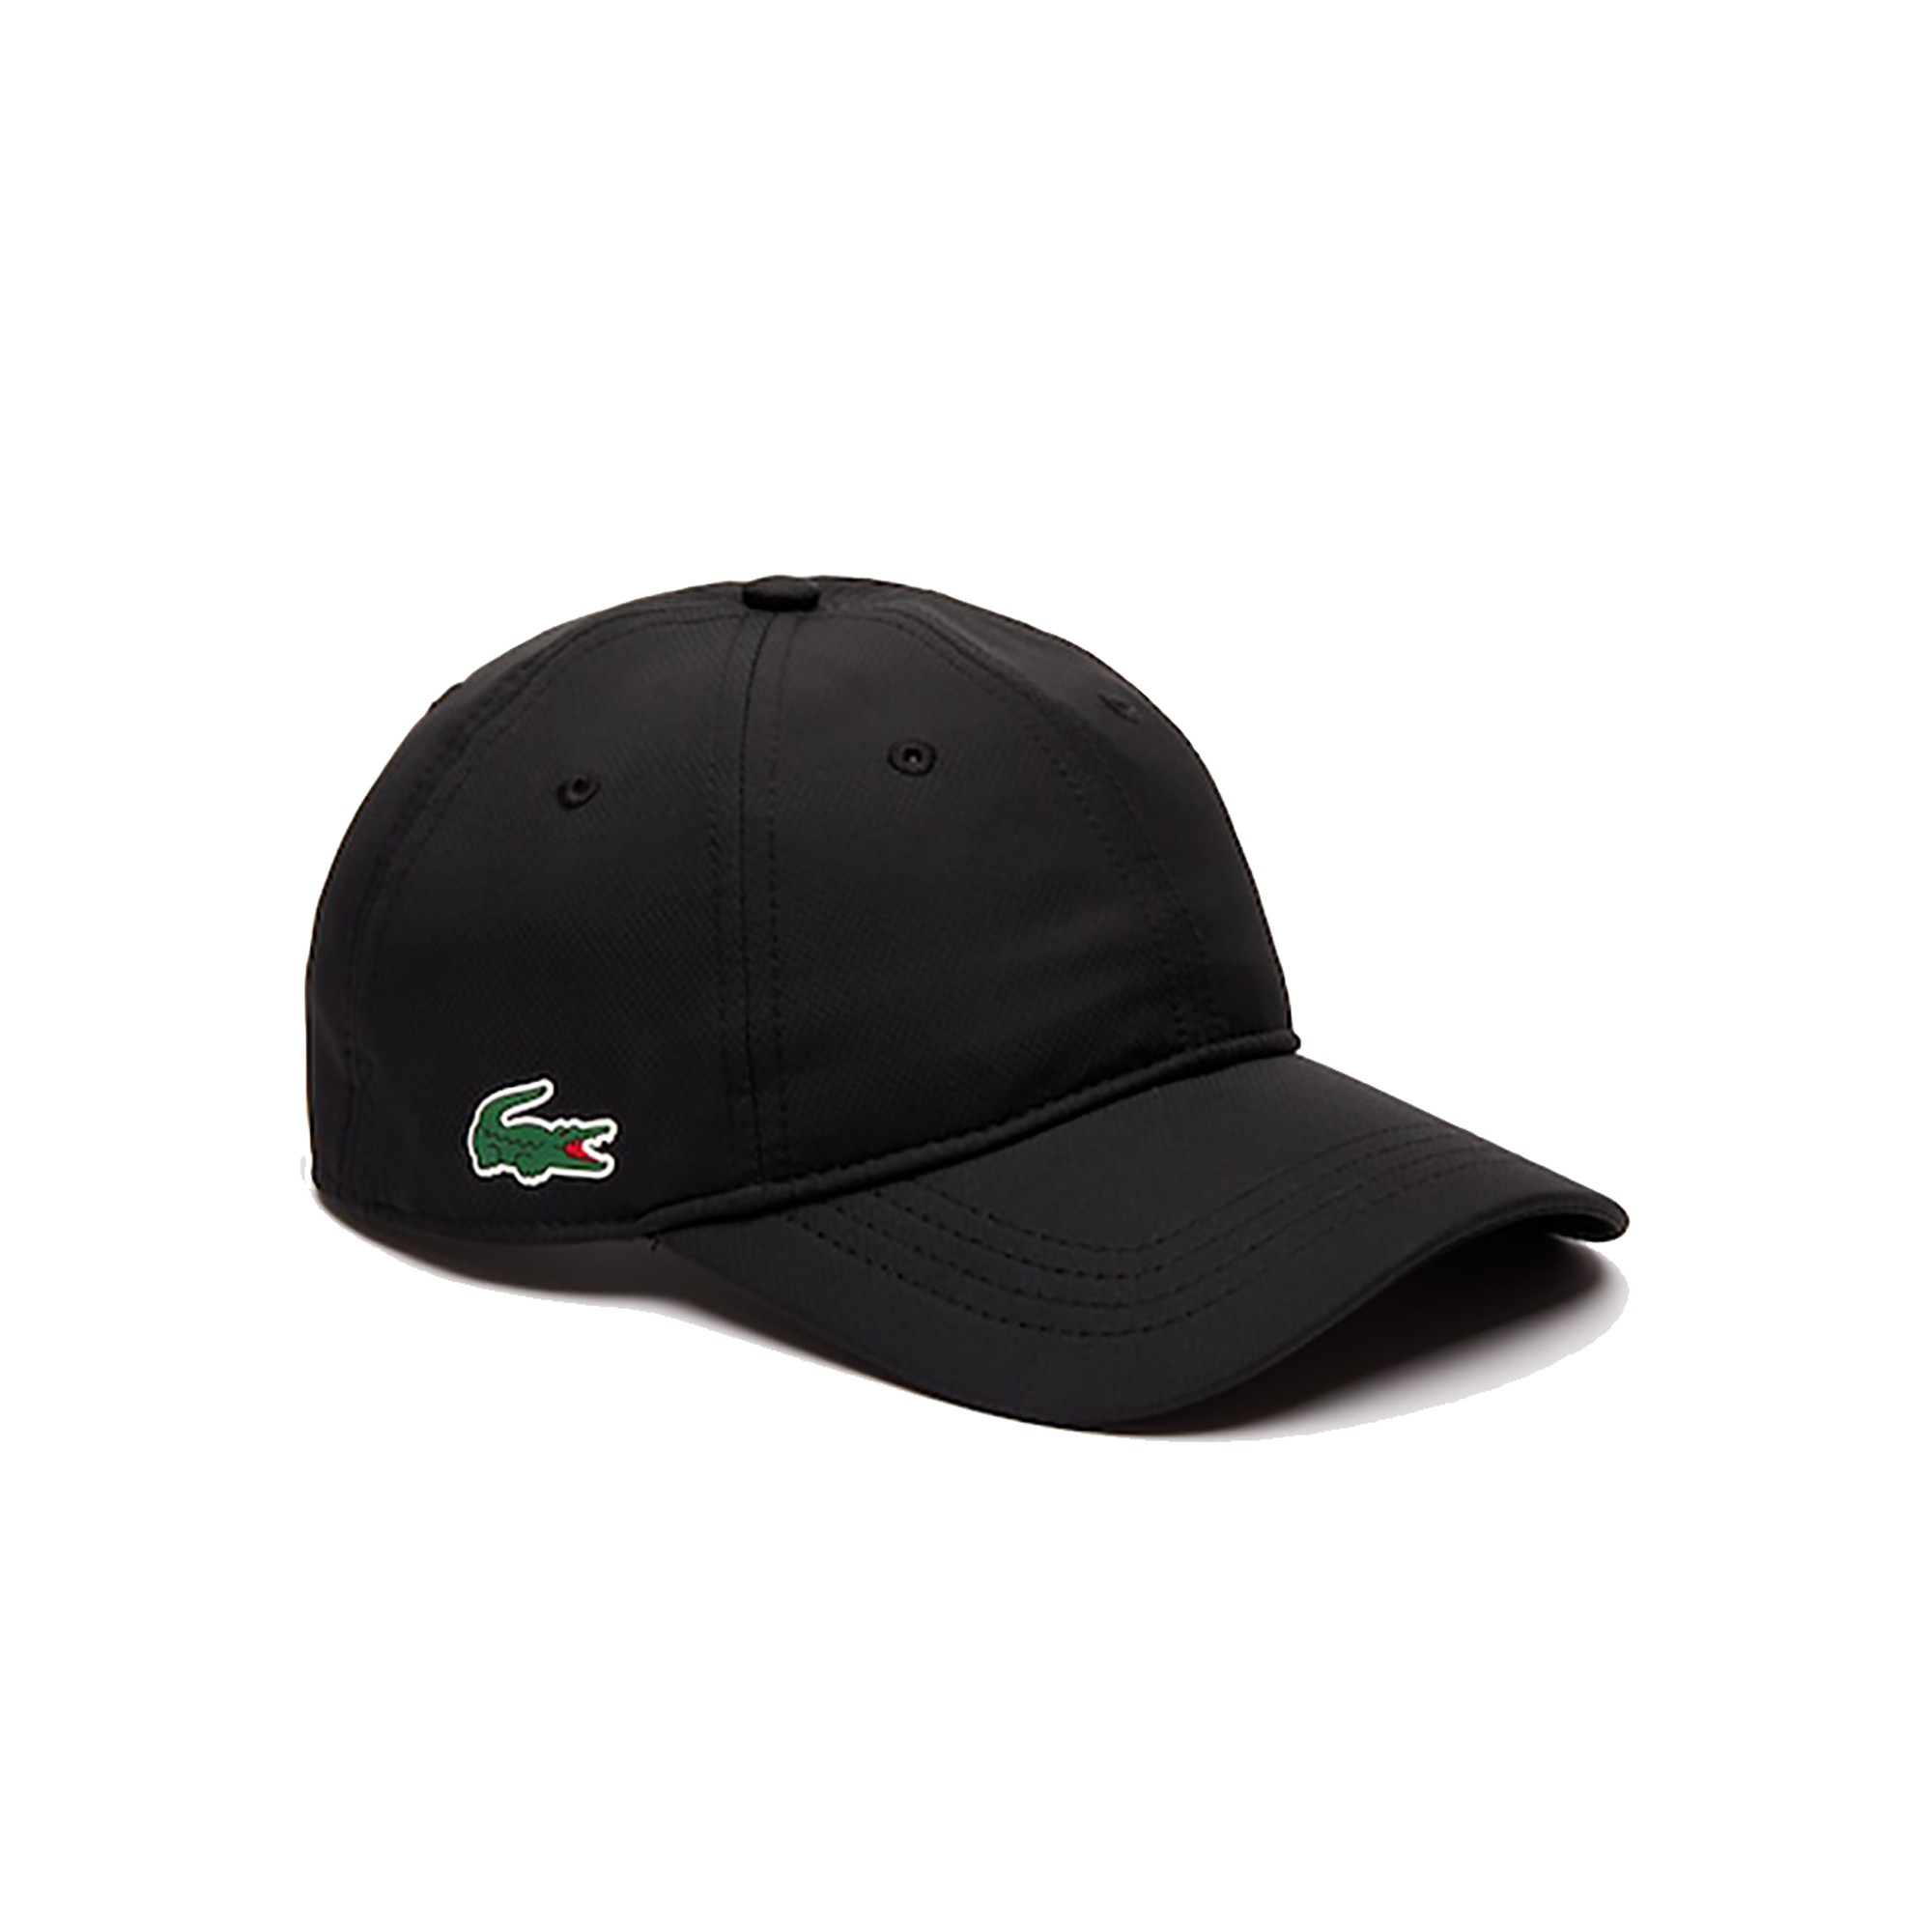 LACOSTE Caps and visors 031 RK2447